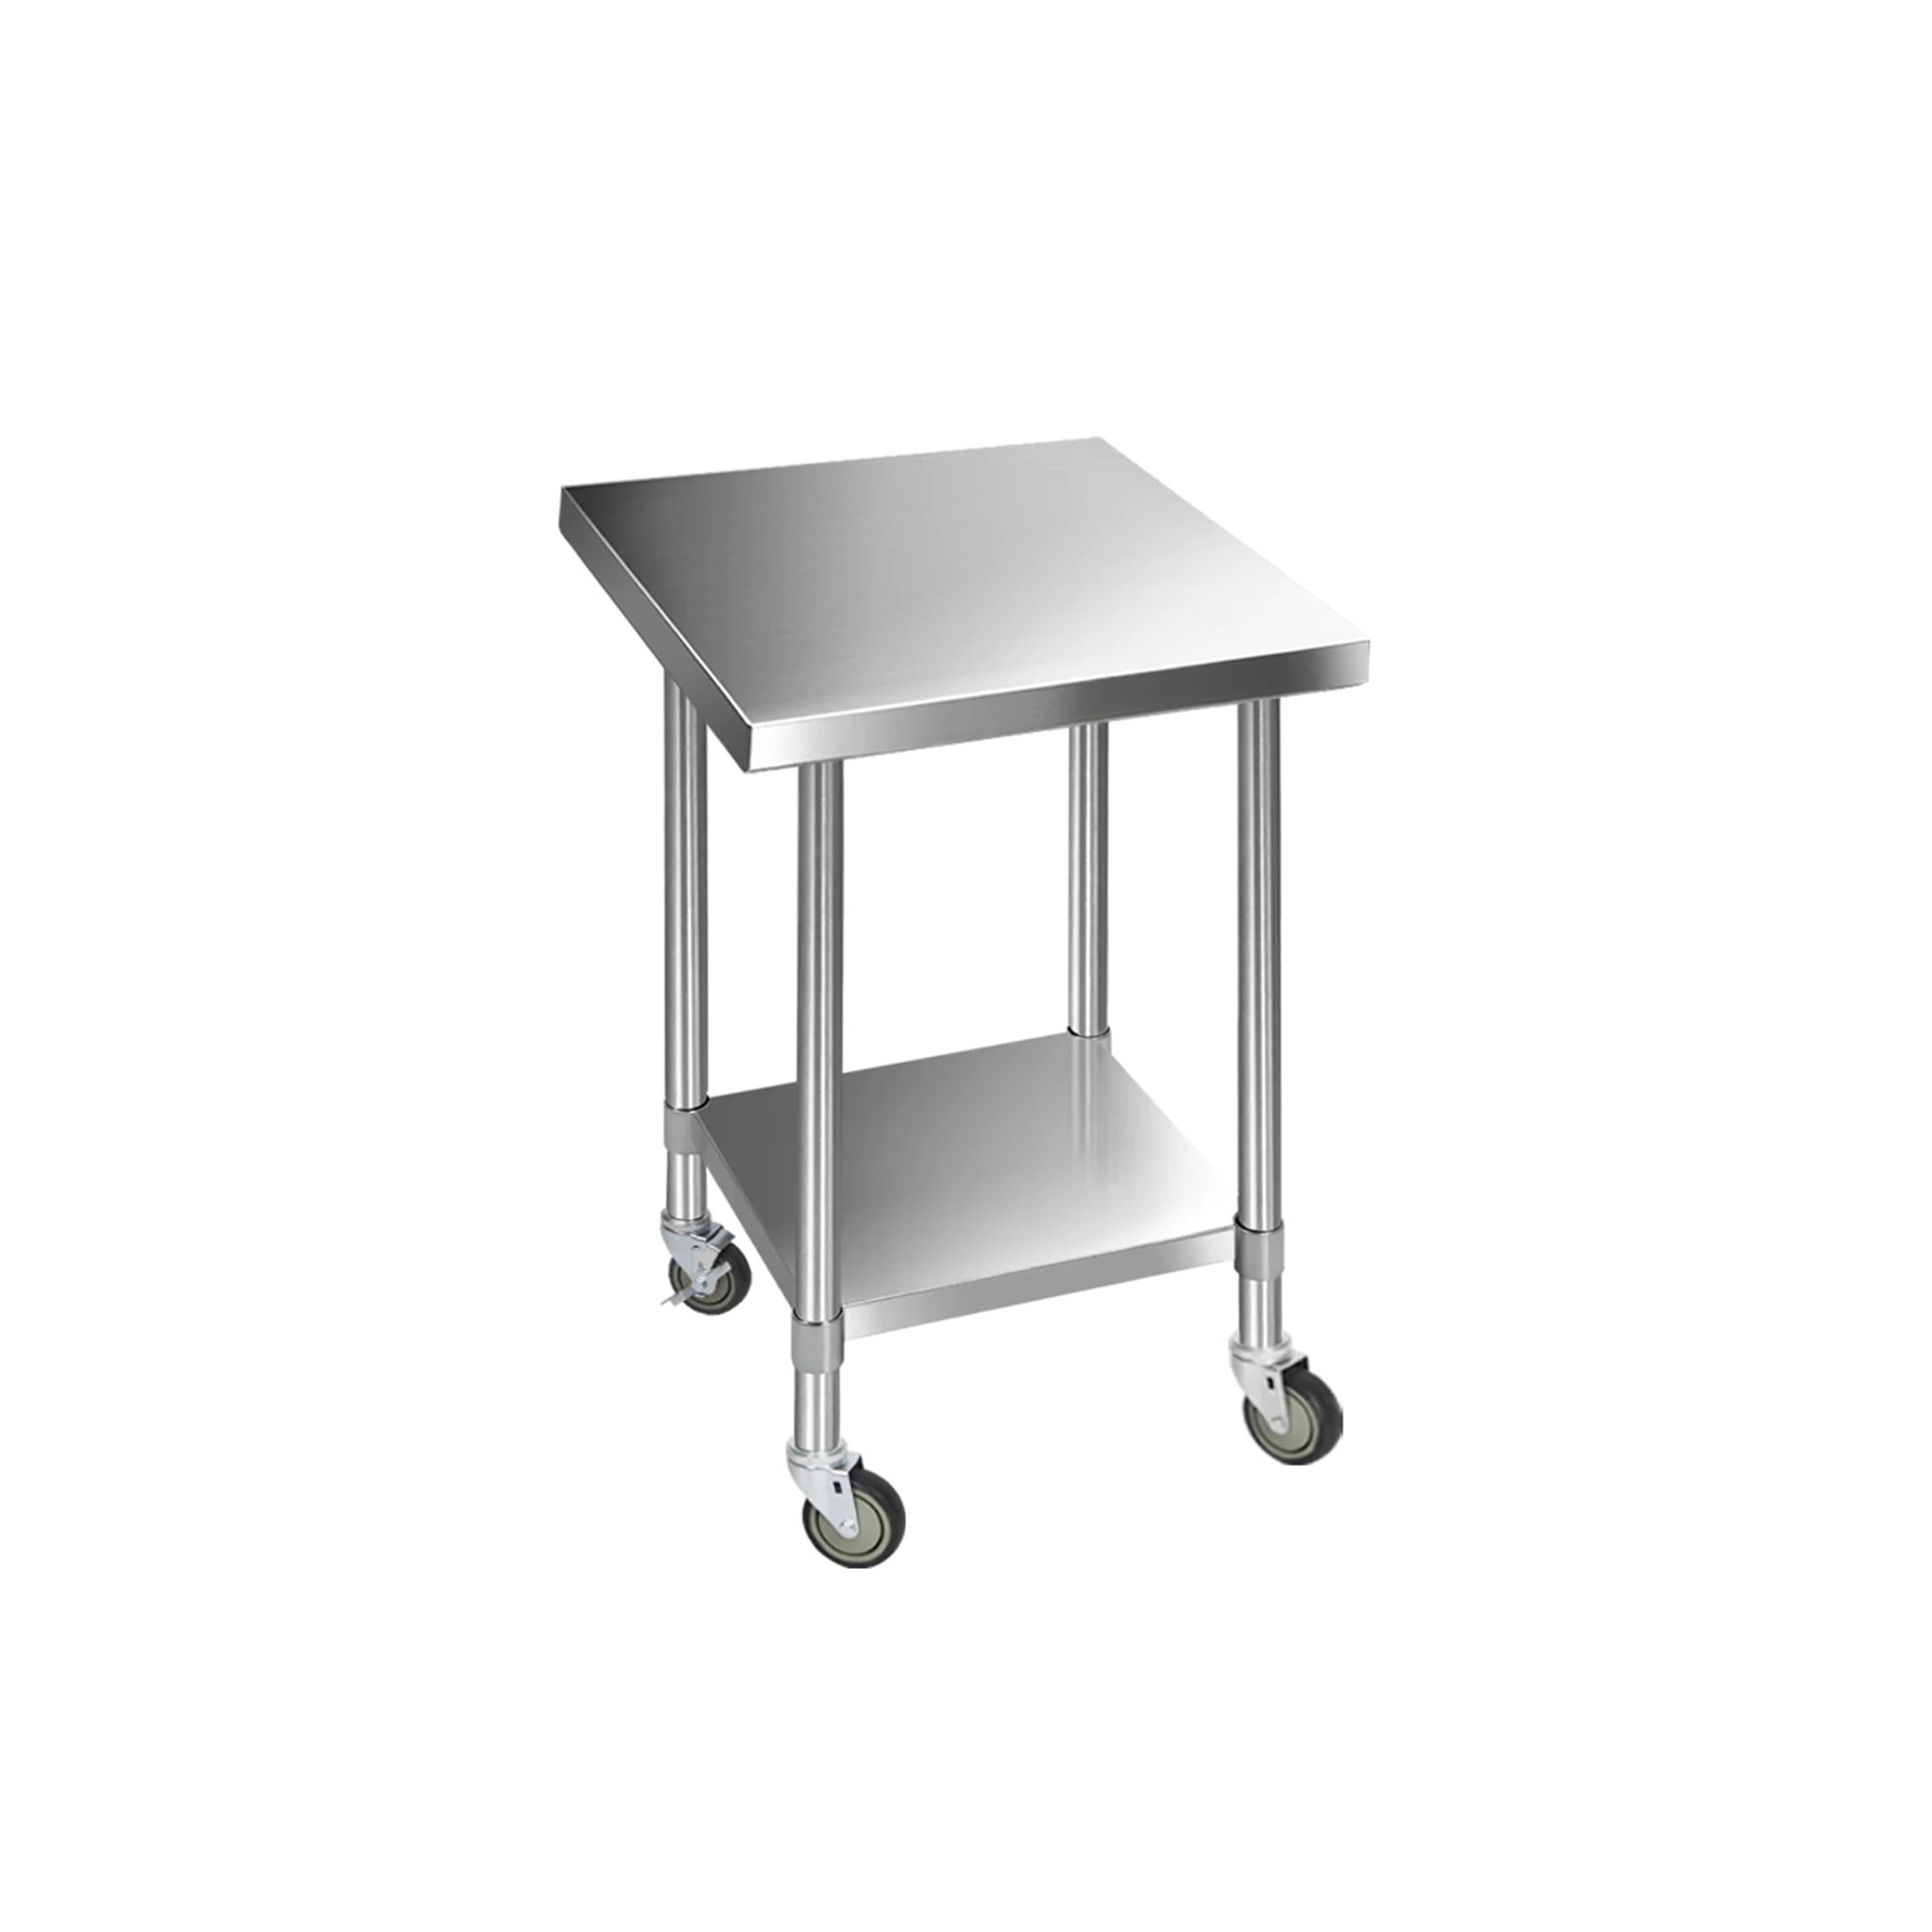 Cefito 430 Stainless Steel Kitchen Bench with Wheels 76x76cm Image 2